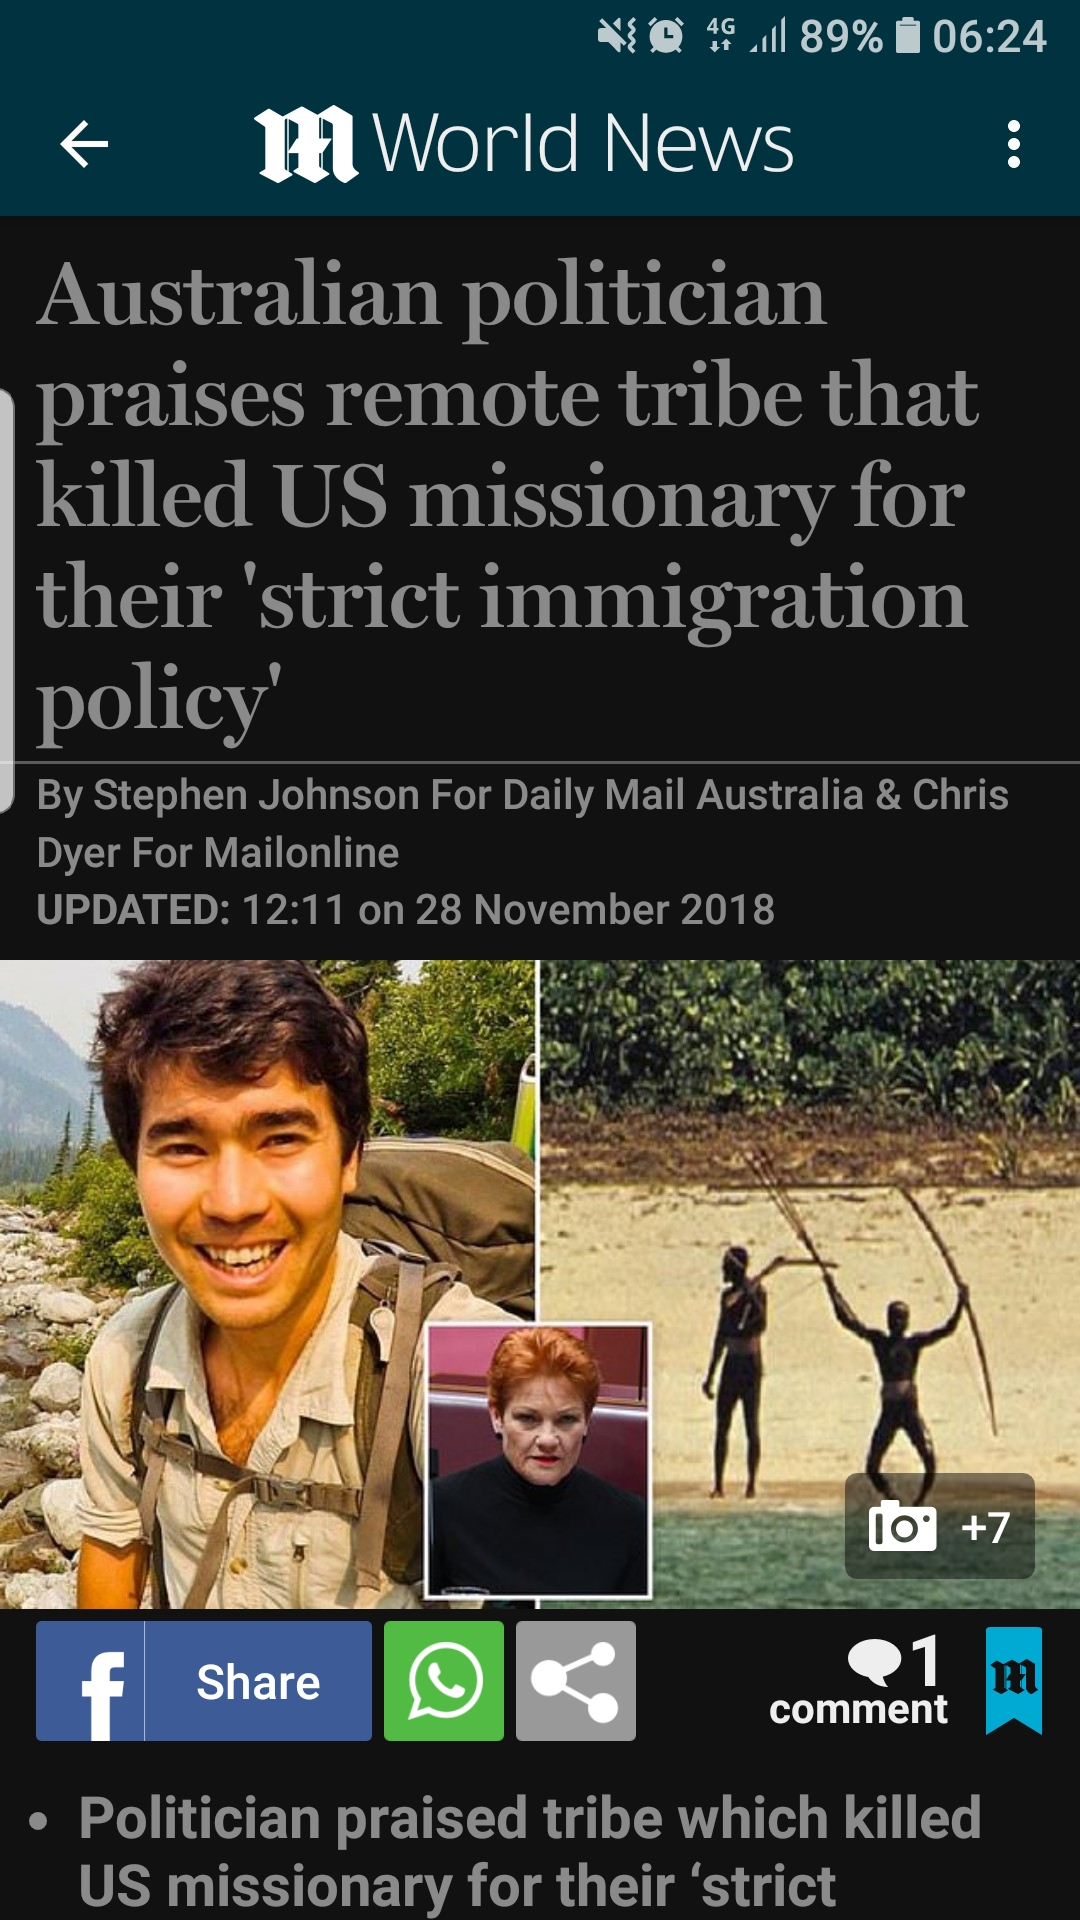 random pic poster - @ 89% m World News Australian politician praises remote tribe that killed Us missionary for their 'strict immigration policy' By Stephen Johnson For Daily Mail Australia & Chris Dyer For Mailonline Updated on 10 7 1 comment Politician 